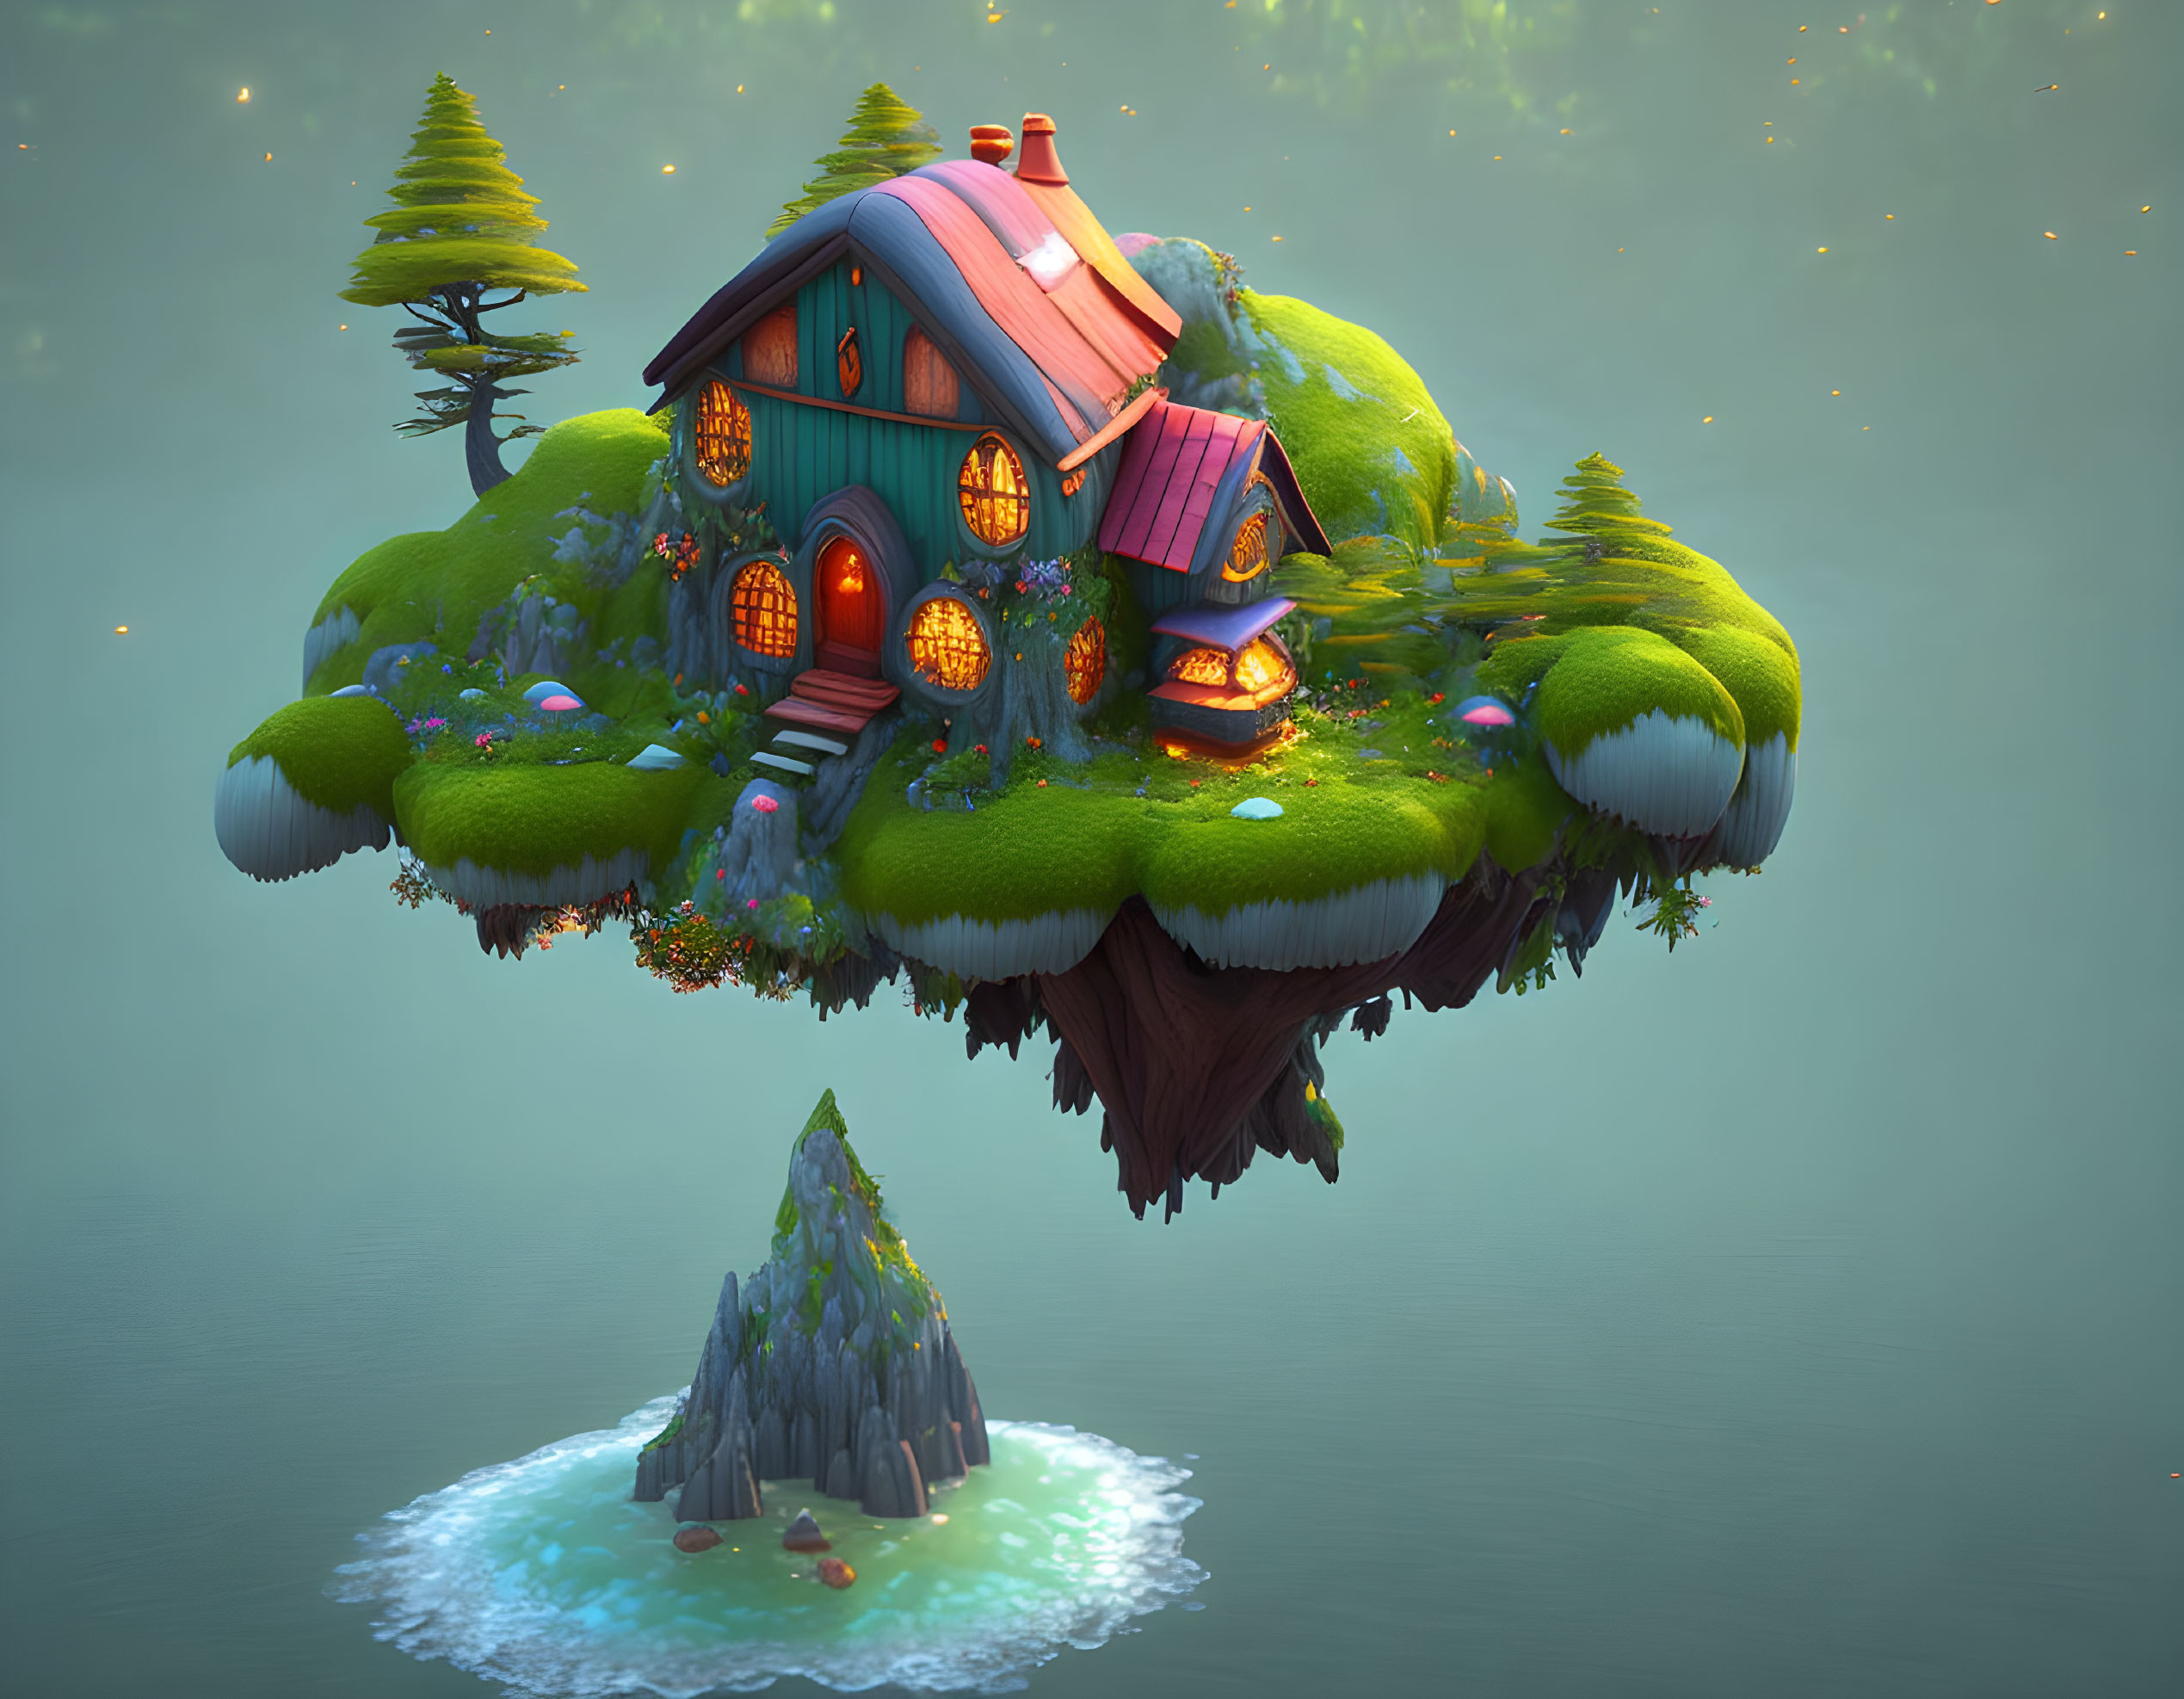  Tiny fantasystyle house on a small flying island